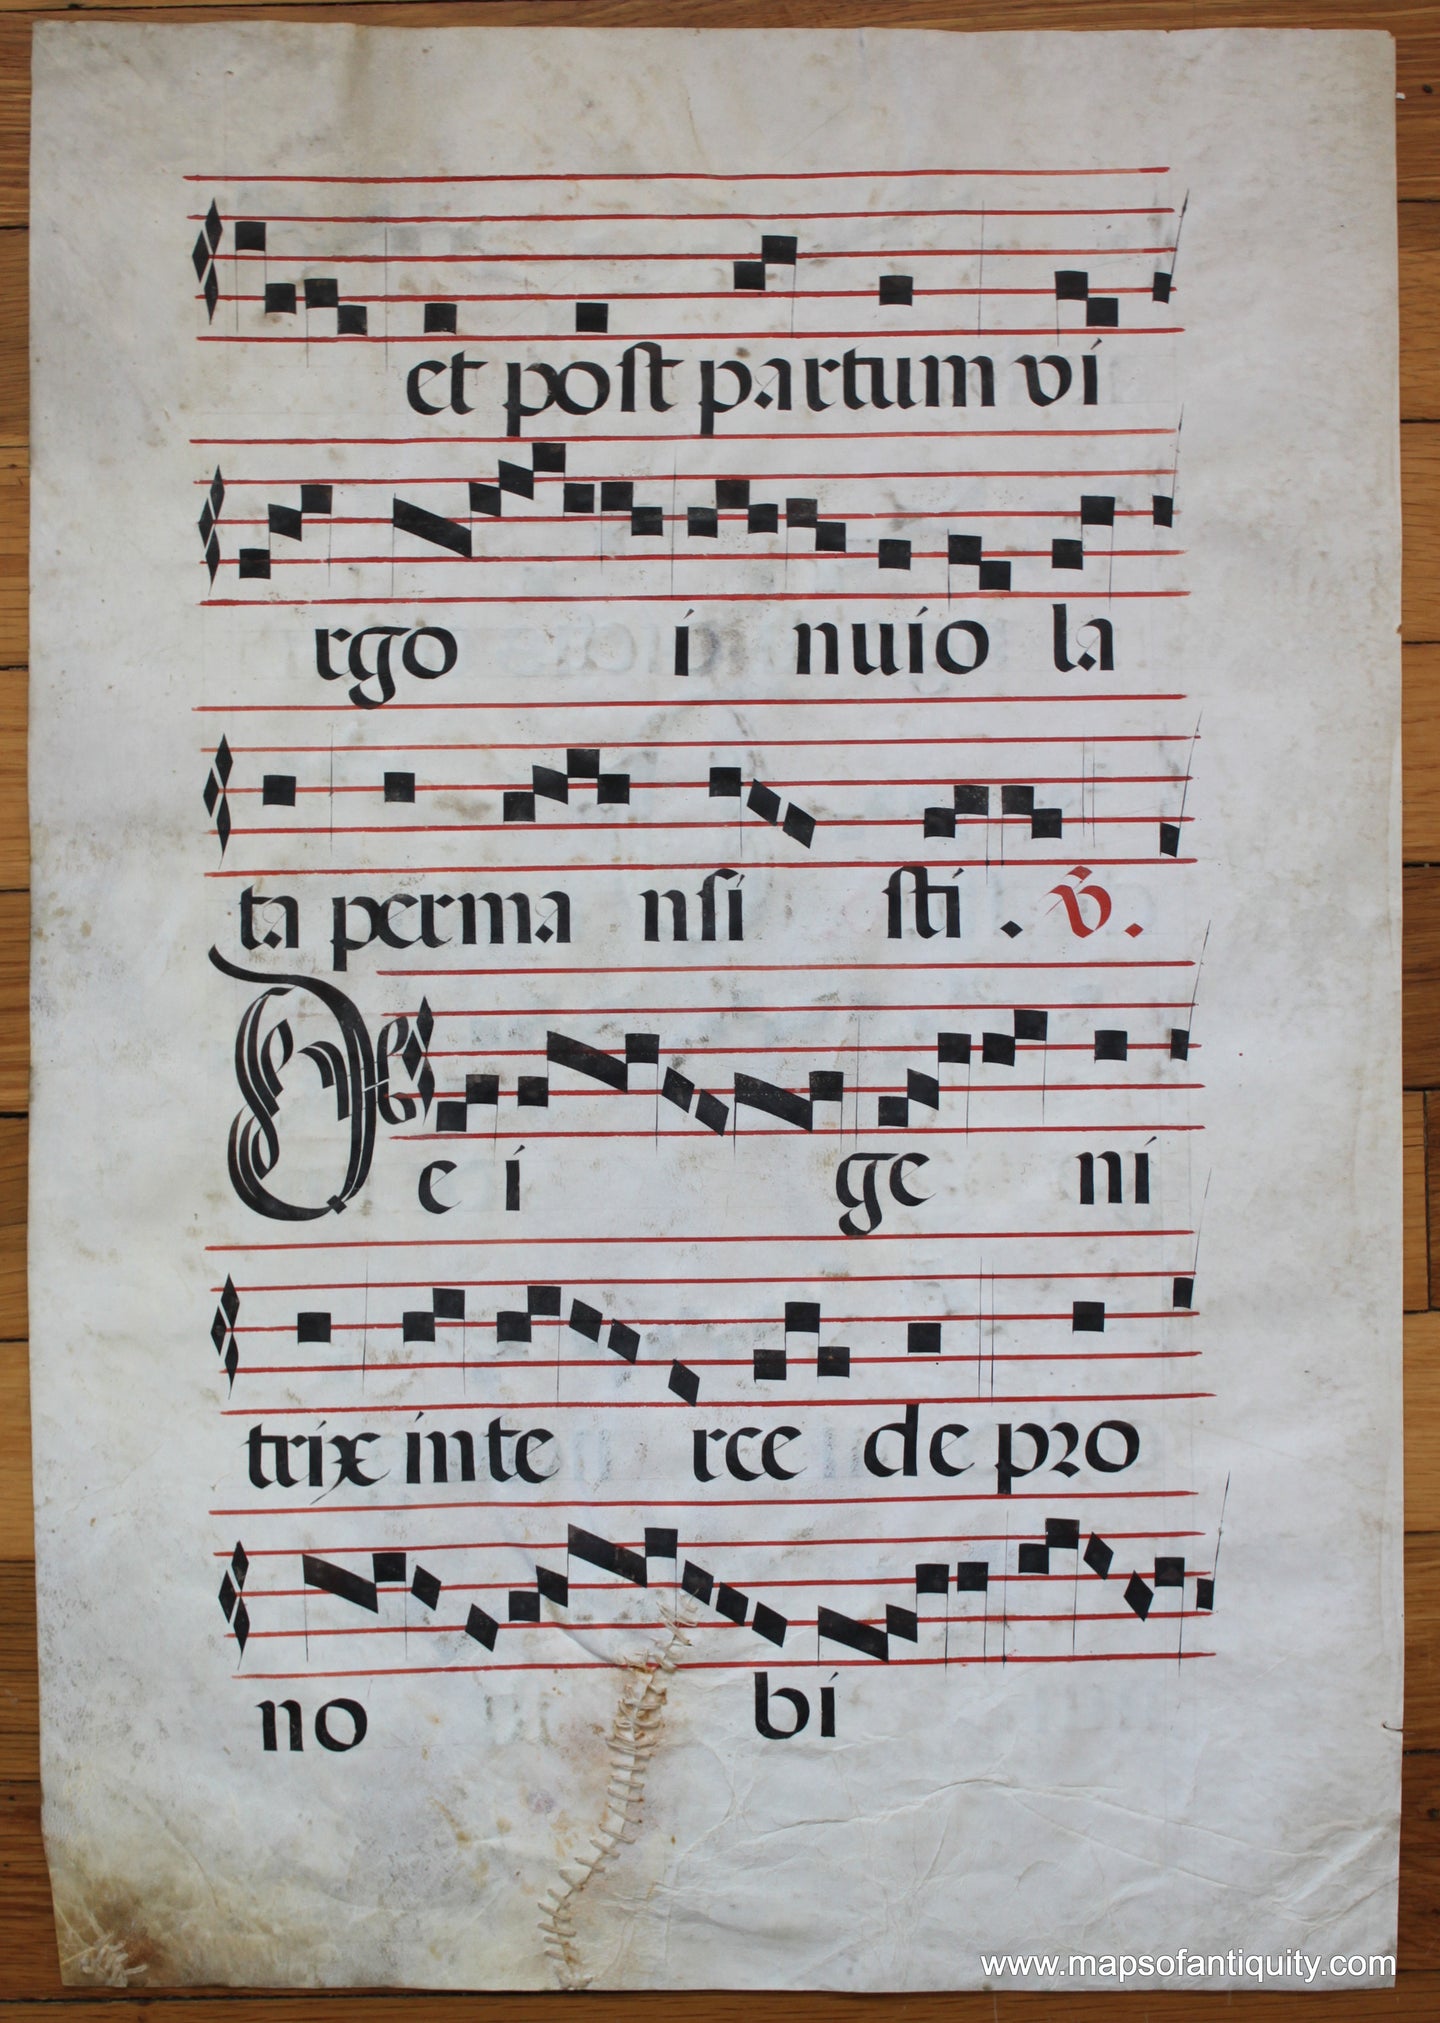 Hand-Painted-Antique-Sheet-Music-Antique-Sheet-Music-No-Title-with-Stitching-**********-Antique-Prints-Antique-Sheet-Music-Middle-Ages-Unknown-Maps-Of-Antiquity